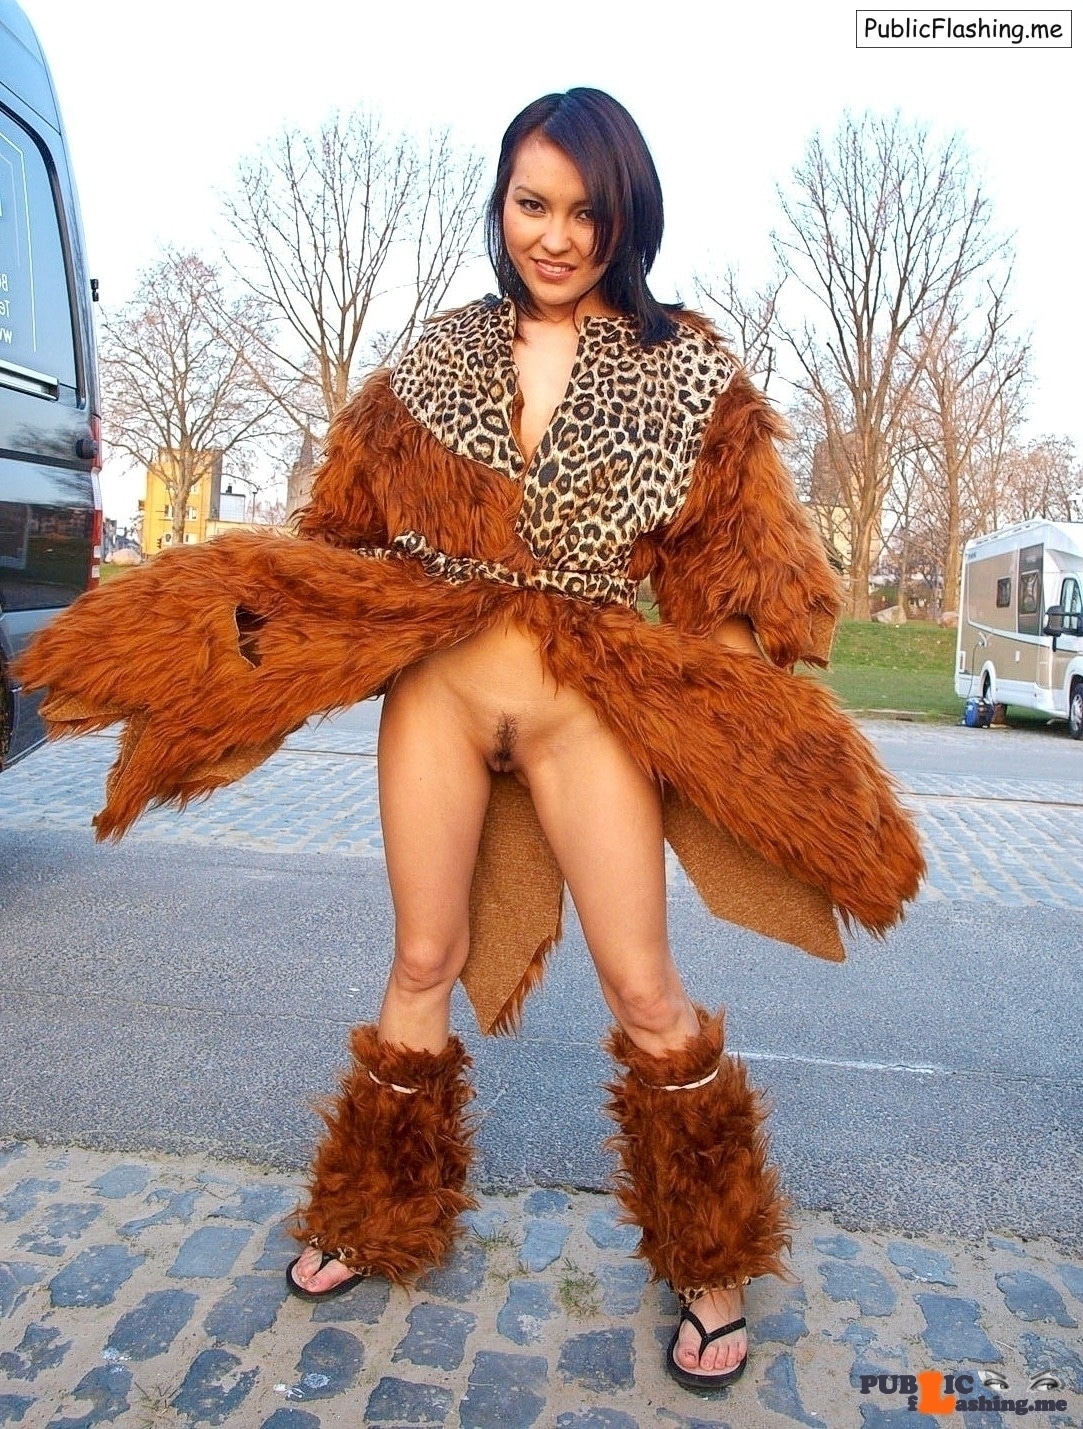 Teen pics Teen Pussy pics Pussy Public nudity pics Public nudity Public Flashing Pictures No panties pics No panties Asian pics Asian : Beautiful Asian model is posing to the camera dressed just in some brown fur coat and fluffy leg warmers, wearing nothing under and flashing her nice trimmed pussy on a public car parking. Asian slim cutie would do anything for...